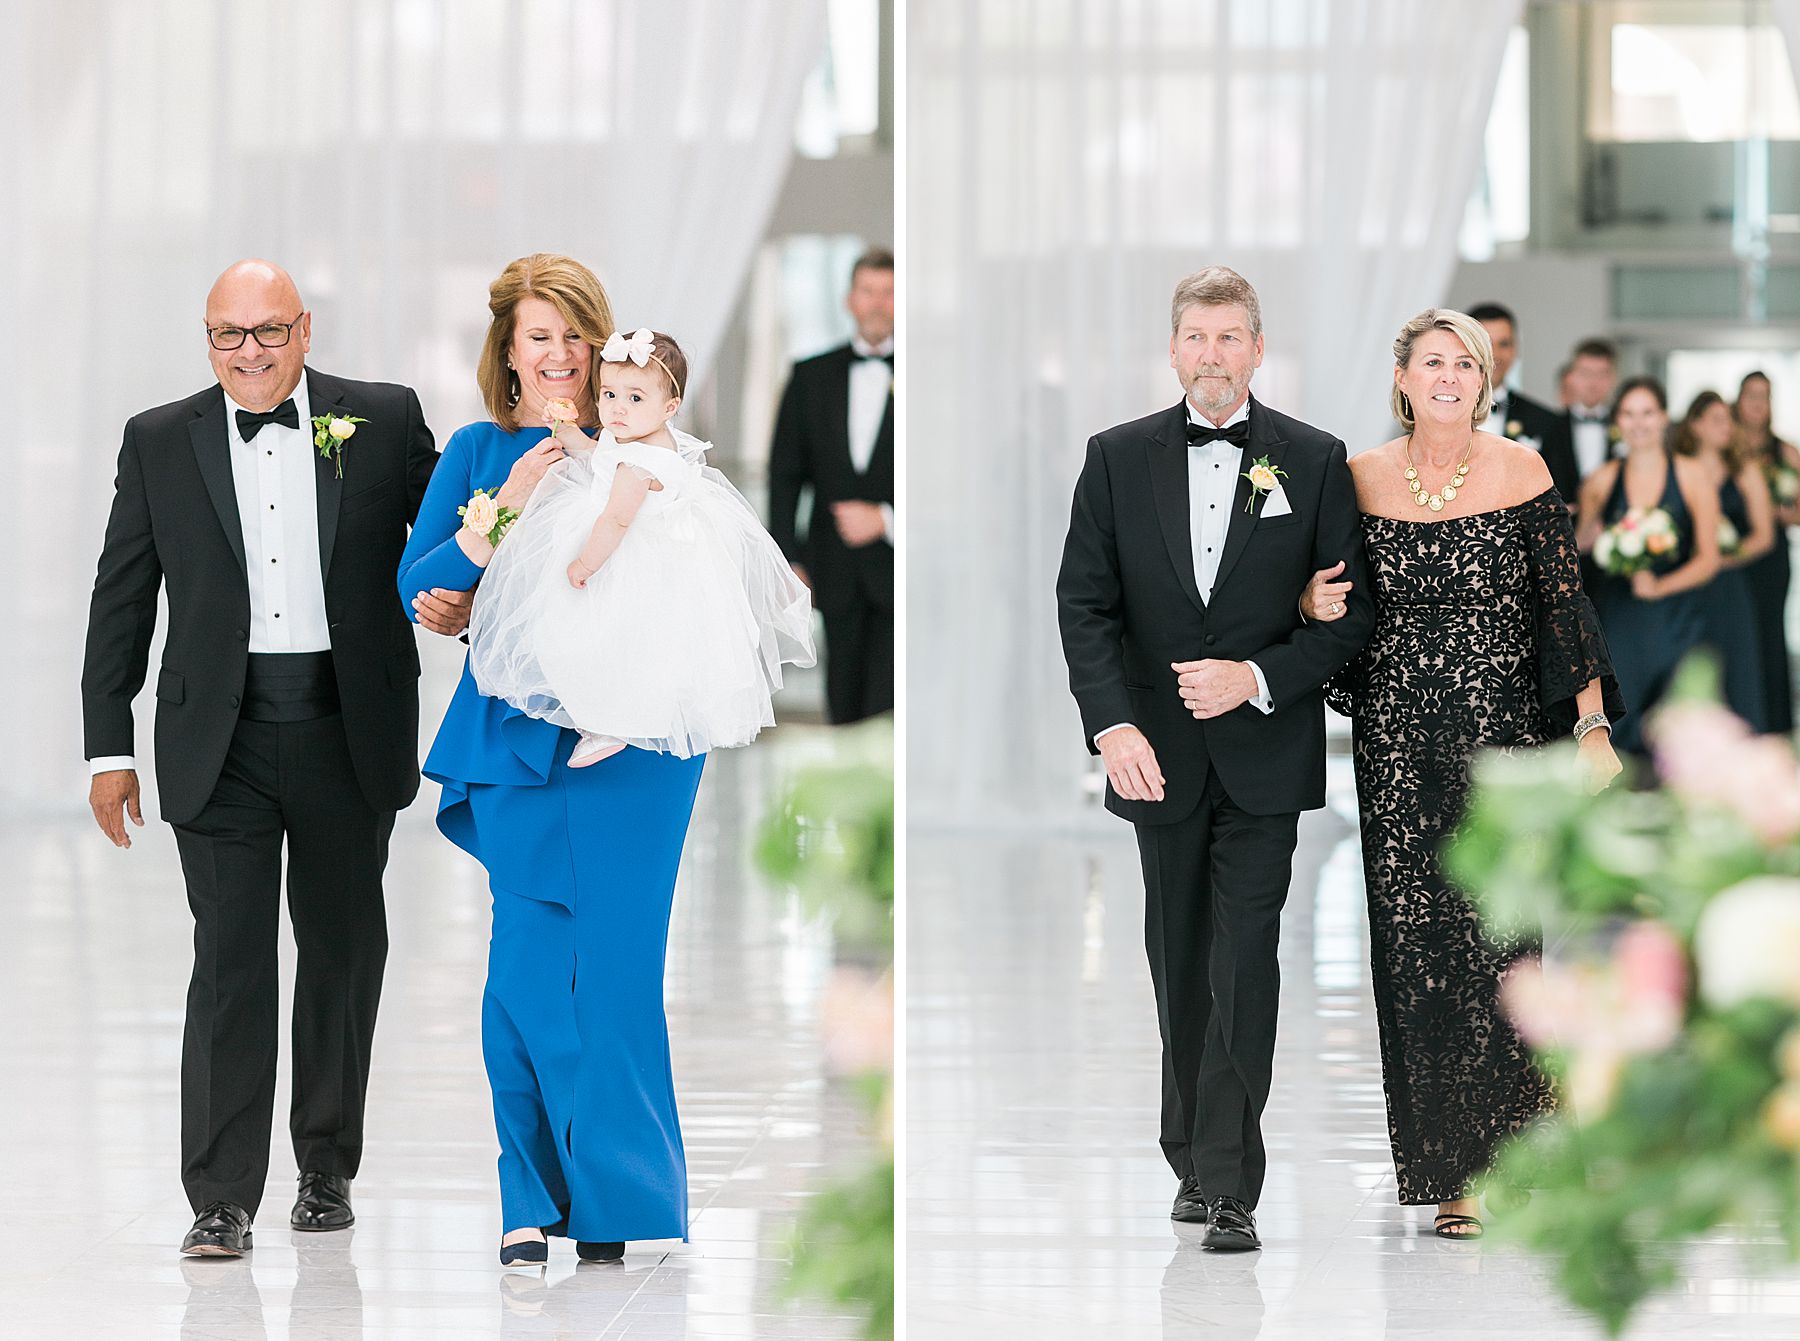 wedding processional with parents and flower girl